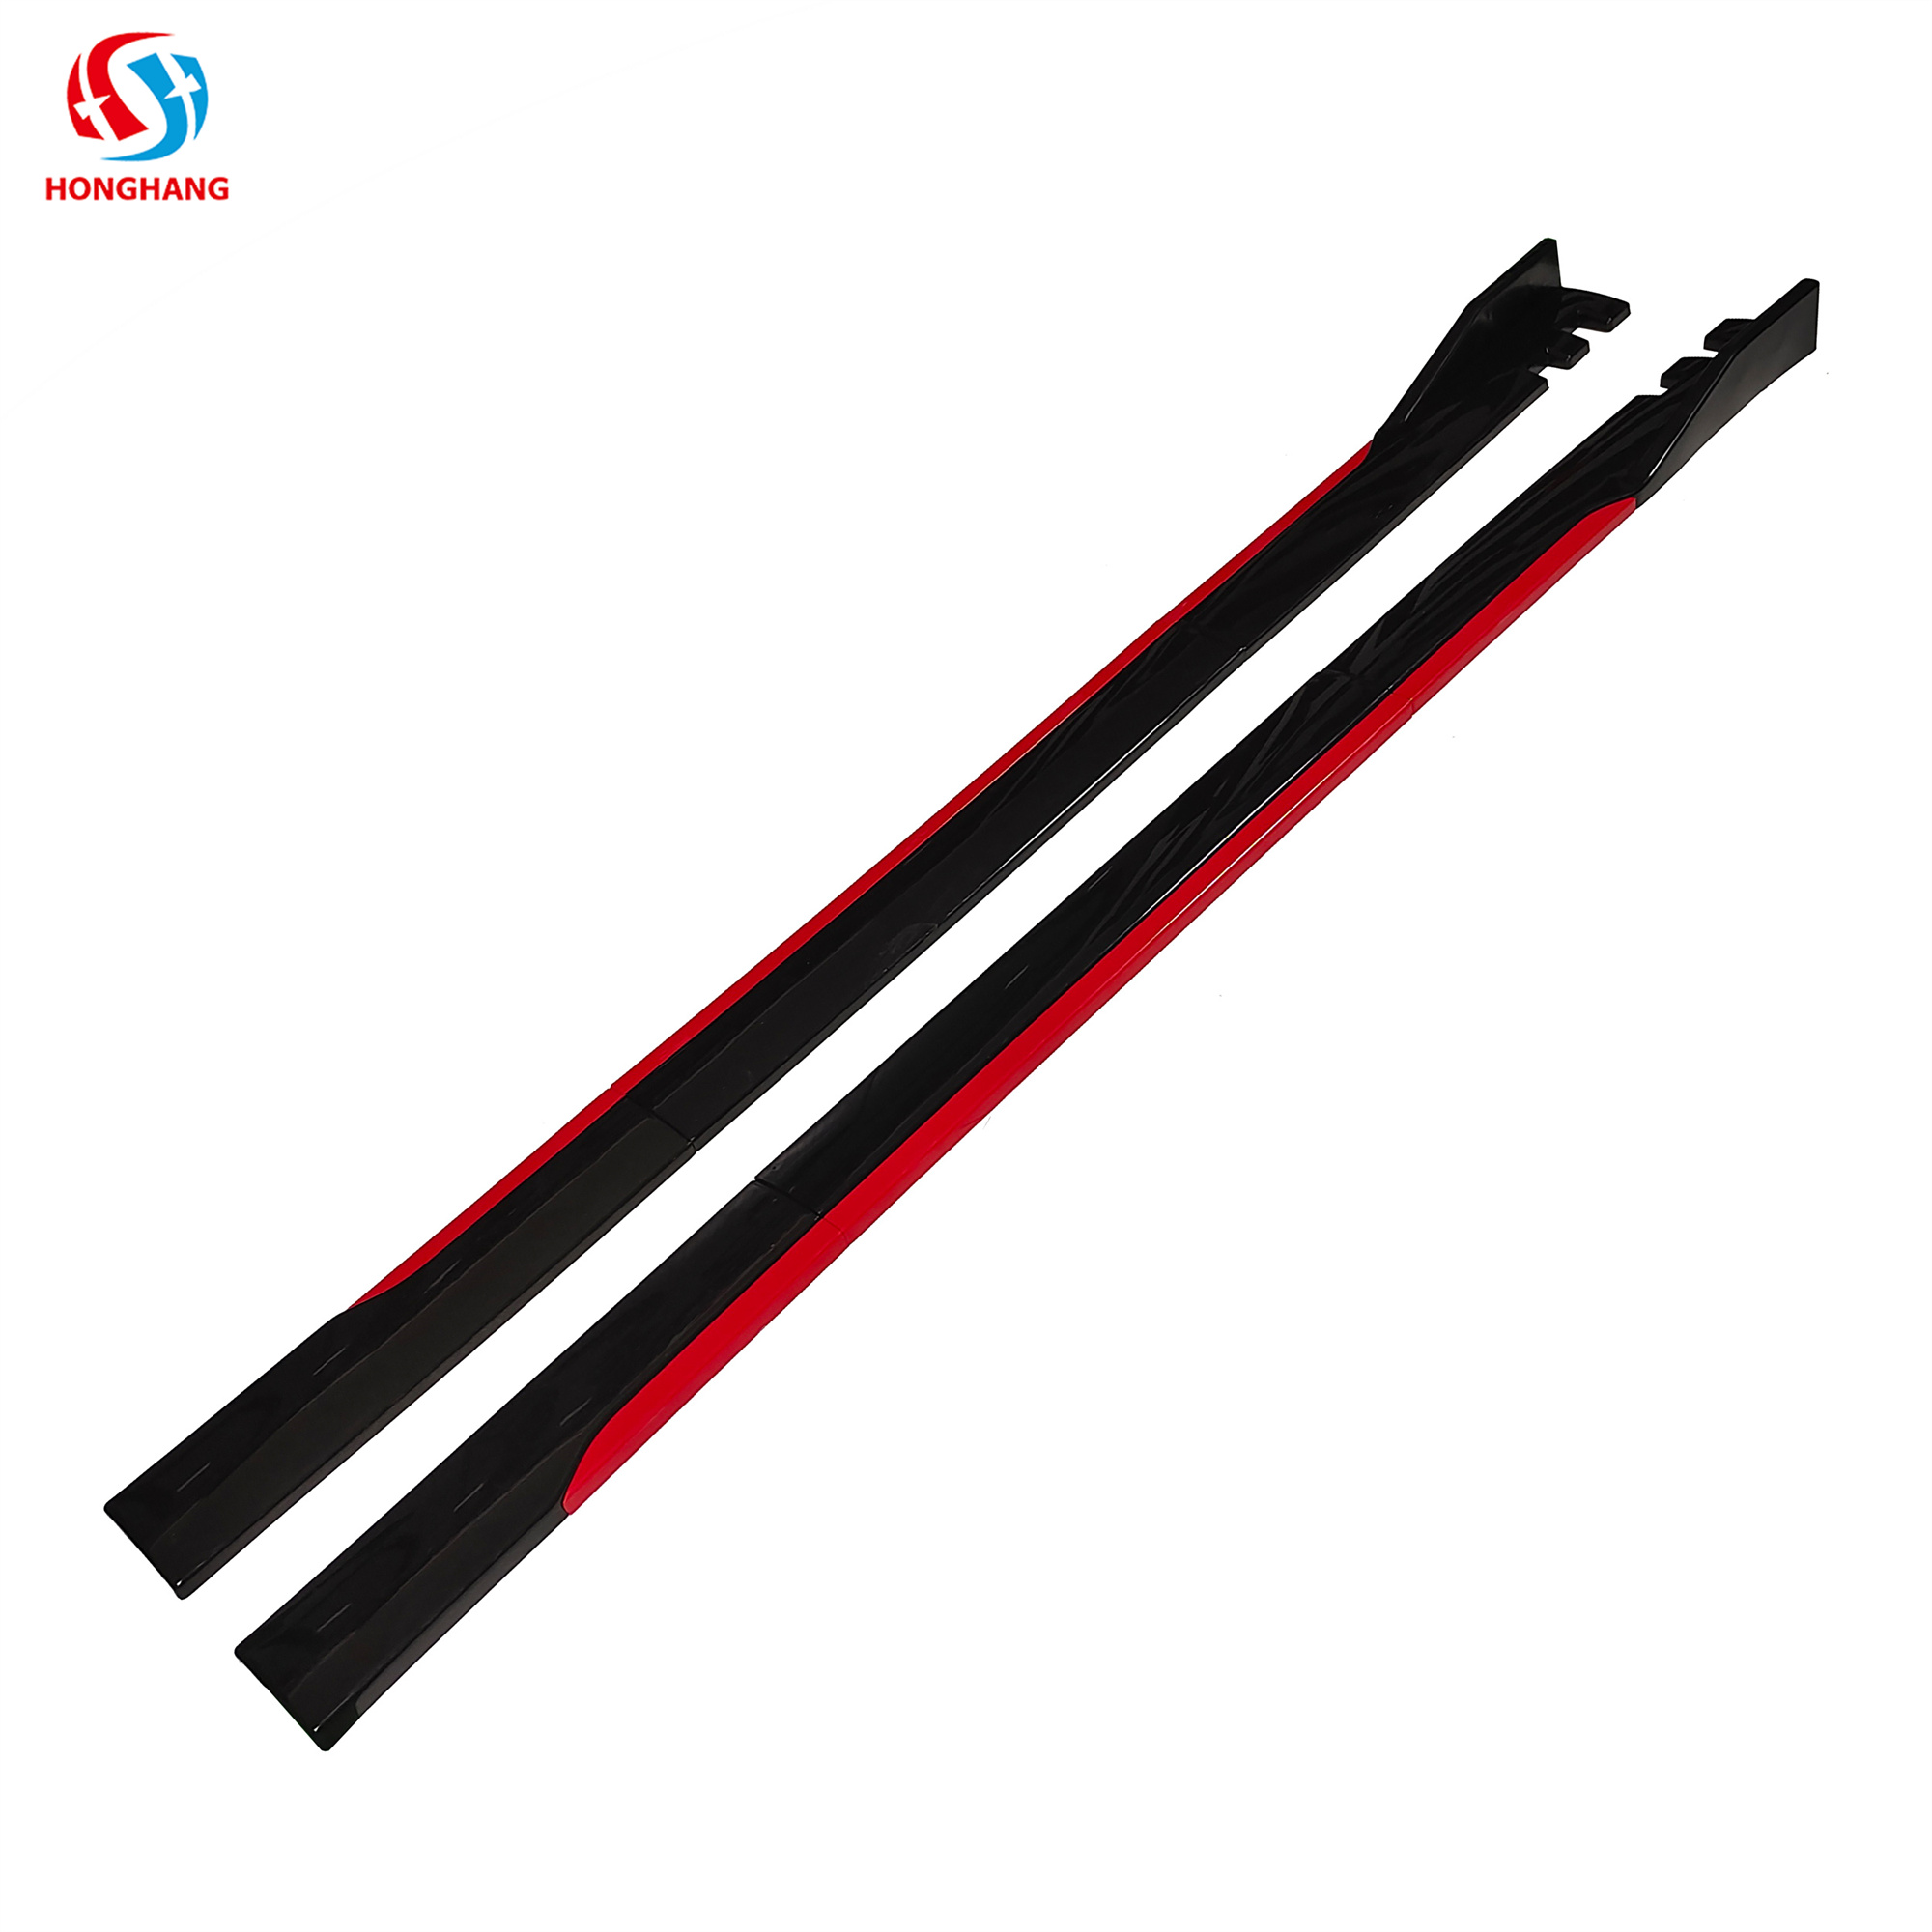 Universal Car Side Skirts Black+Red For All Cars Toyota Honda Benz BMW Audi VW Type J 6-stage 12pcs